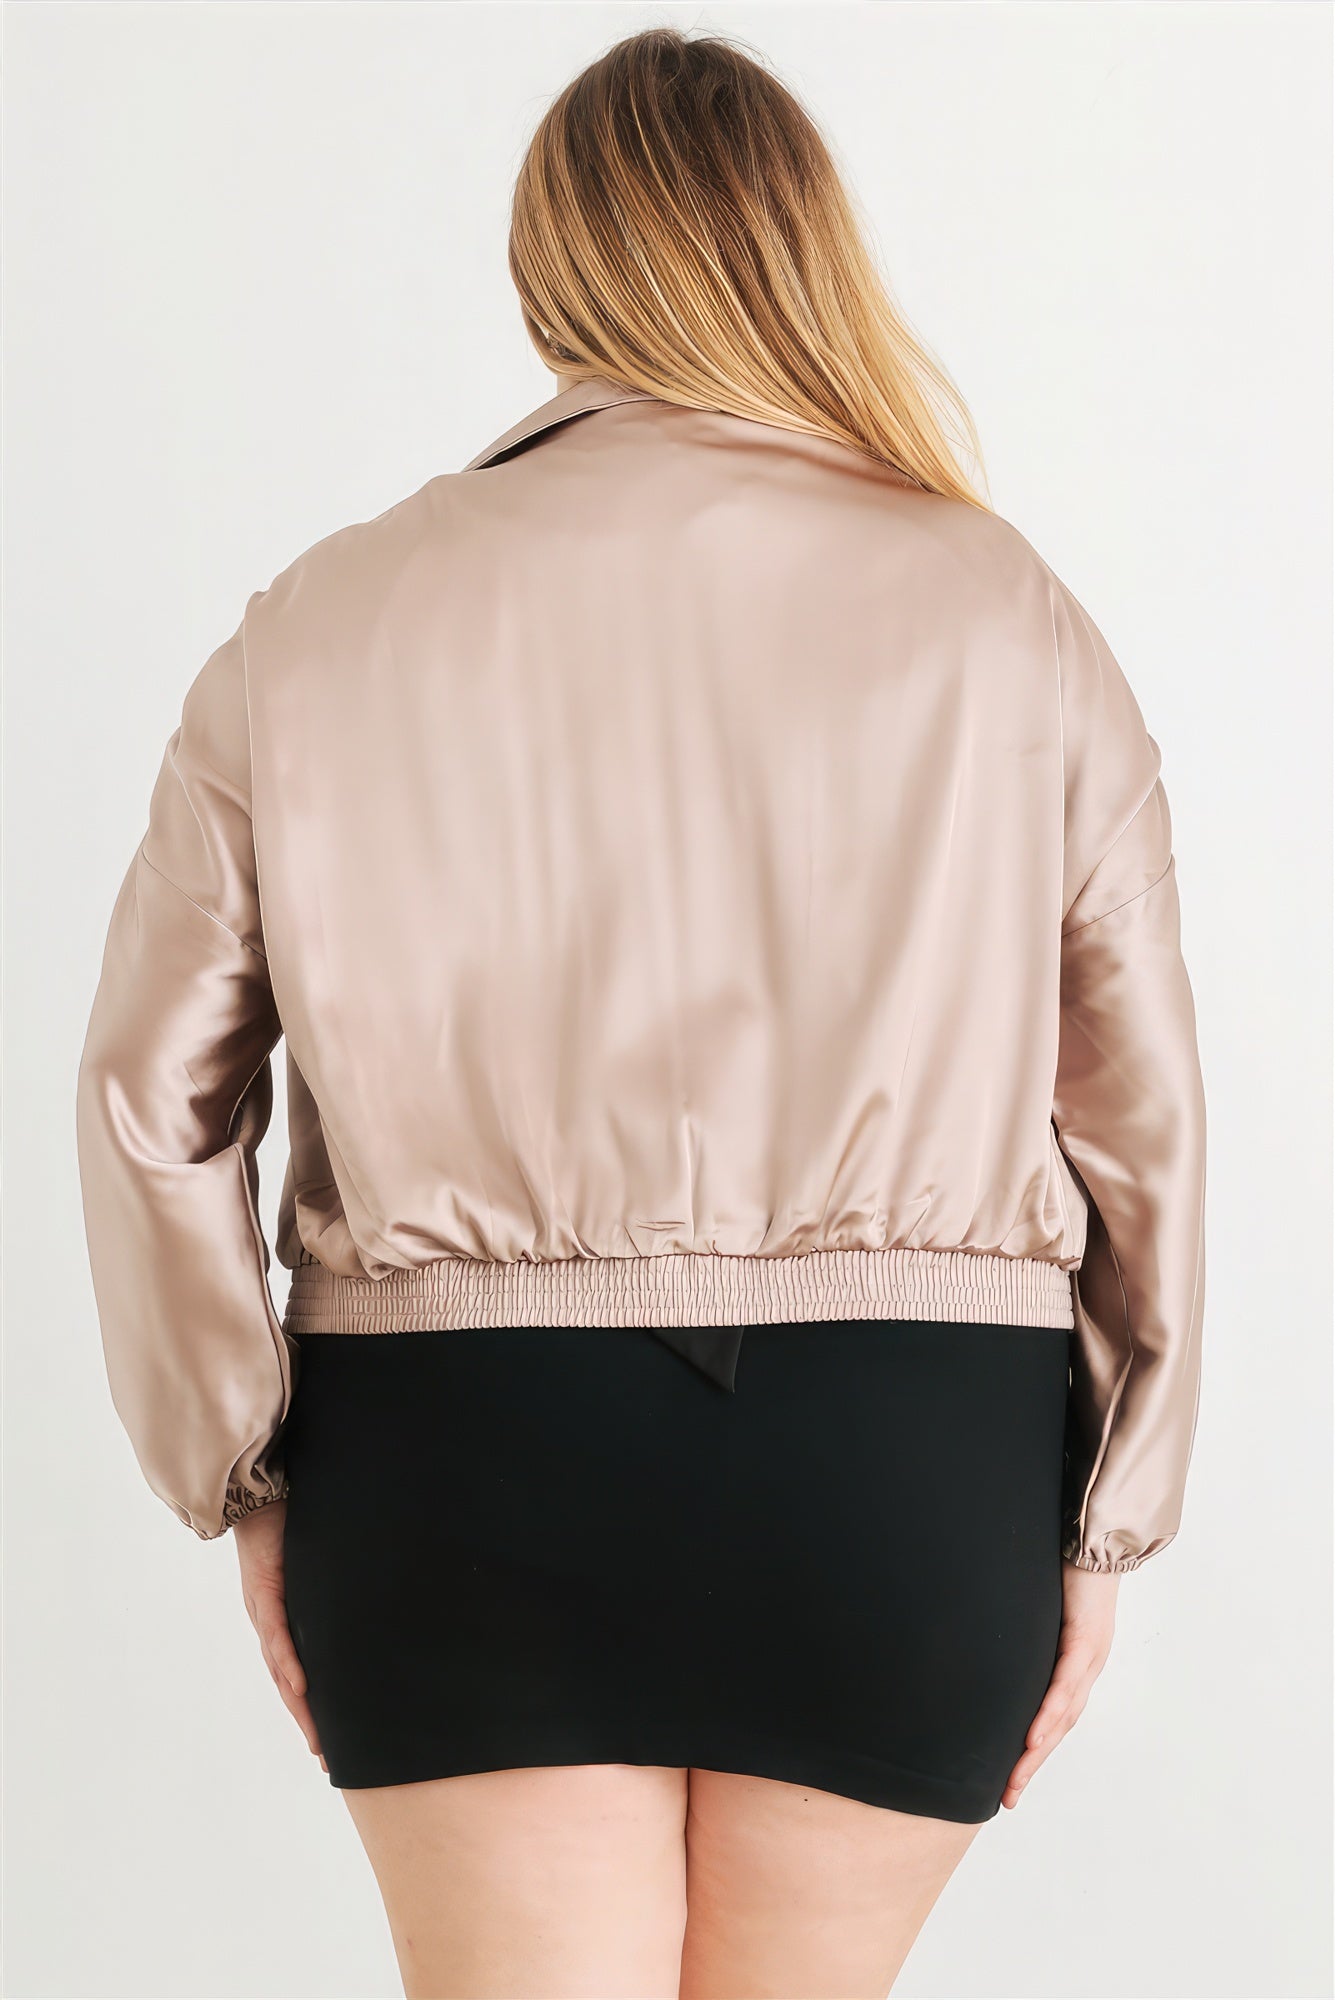 Women's Plus Satin Zip-up Ruched Long Sleeve Cropped Bomber Jacket